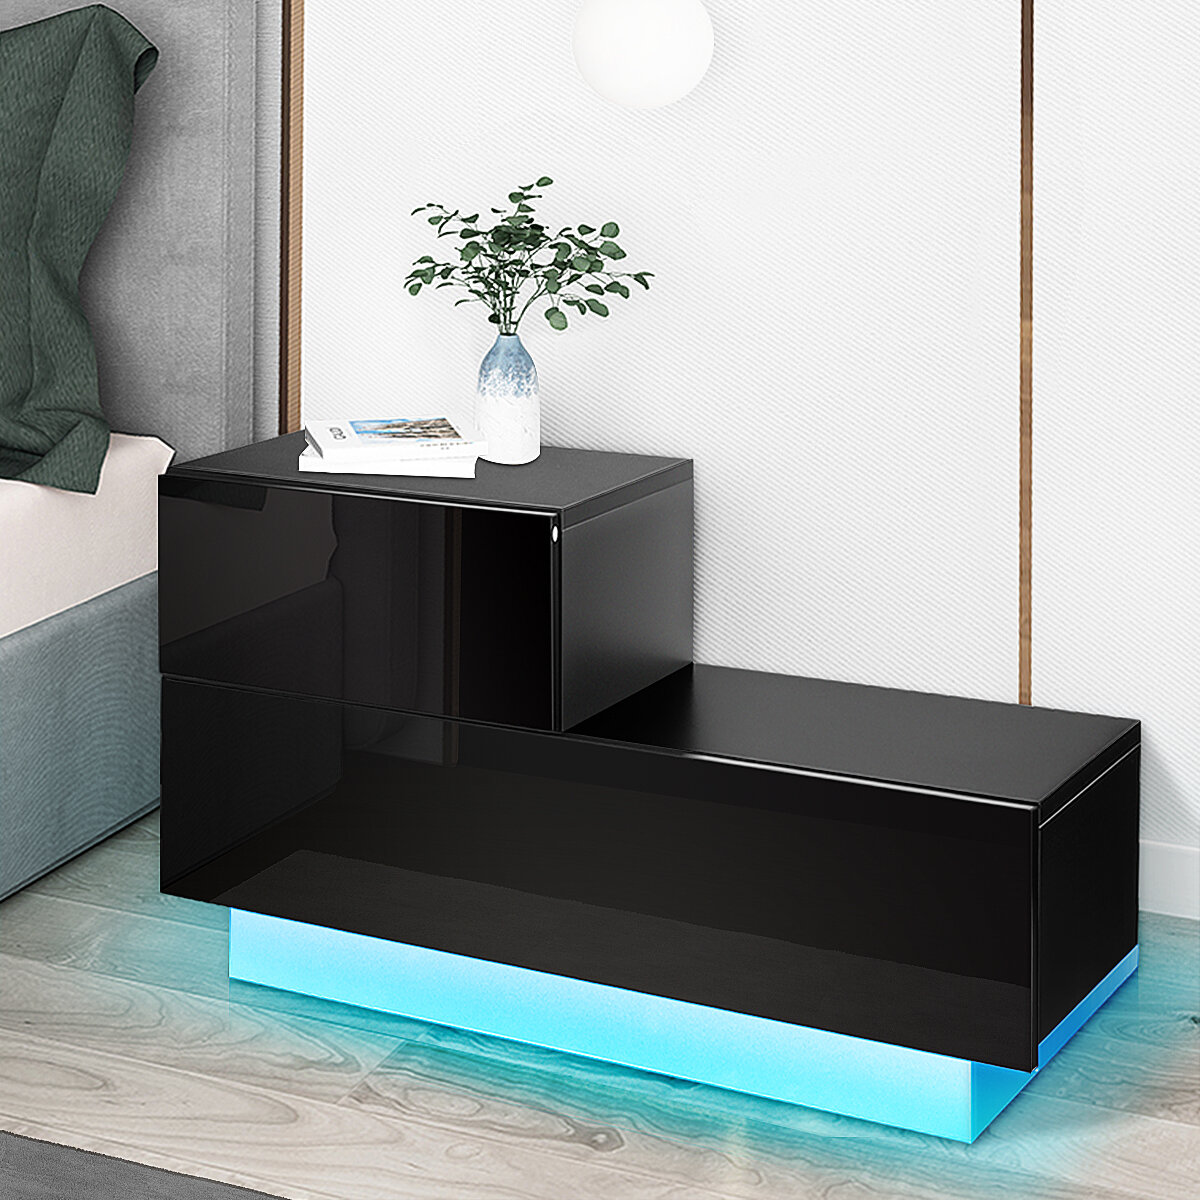 Image of Woodyhome Nightstand with Multi-colour RGB LED Backlight Modern High Gloss Bedside Table with 2 Drawers for Home and Off